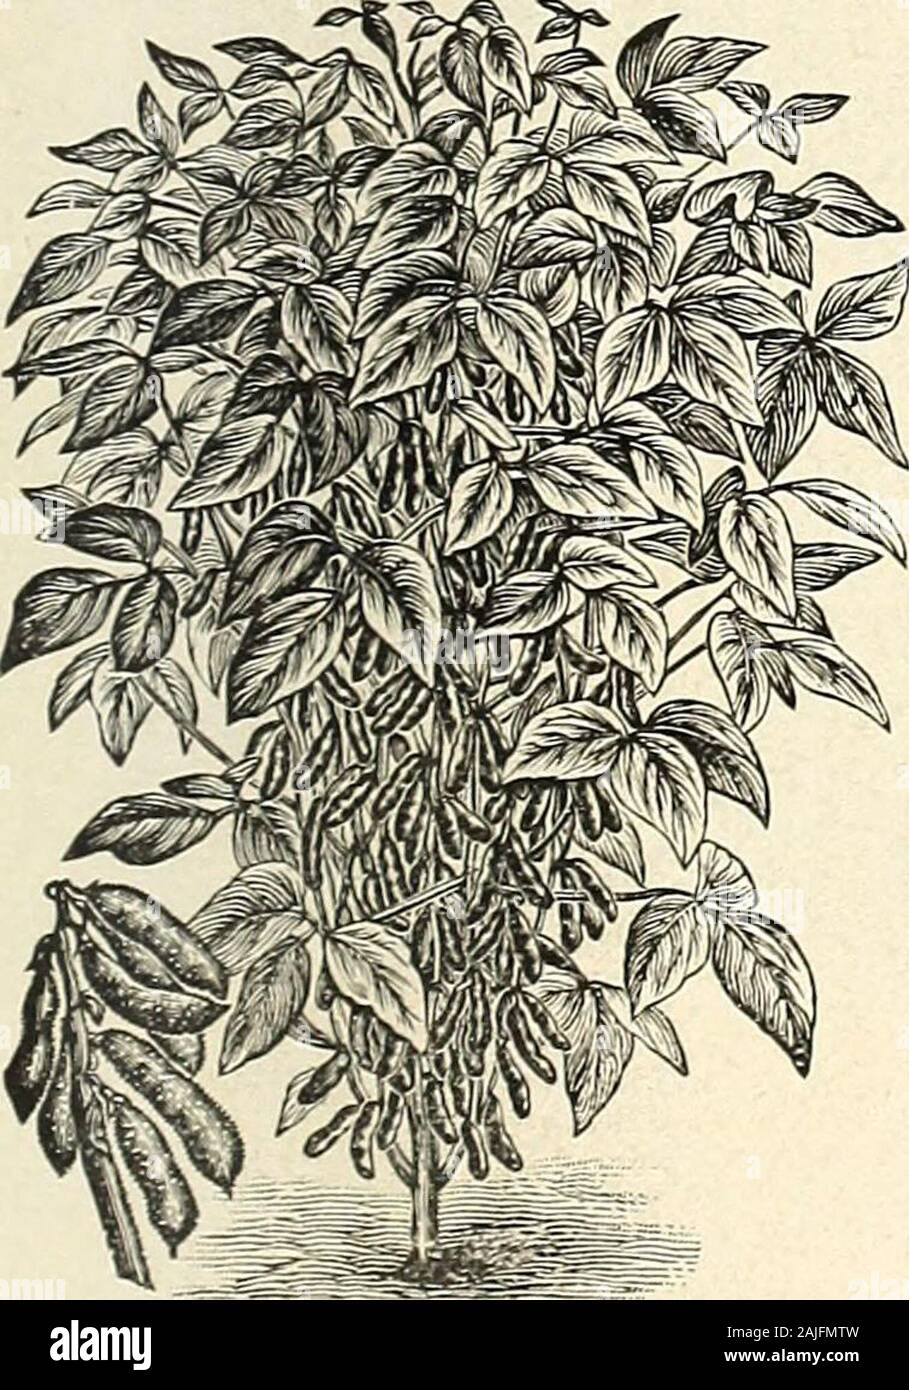 H.W Buckbee seed and plant guide : 1905 . nce. Mr. Queen, the originator, says: It is so far aheadof all others that 1 have seen or tried as to be beyond comparison in everyrespect, especially in yield, in sturdy growth, in size and in color whenpopped-being of a delicate golden yellow. Pkt, 5c; Vi pt. 15c.; pt, 25c,;qt. 40c. Mapledale Prolific—Th is remarkable variety originated with Prof. R. L. Weth-erell. of Davenport Iowa, who states: I selected on my Mapledale FruitFarm this year ten stalks with 121 ears, or an average of 12 ears to thestalk, one stalk having 19 ears. The stalks grow 6 fe Stock Photo